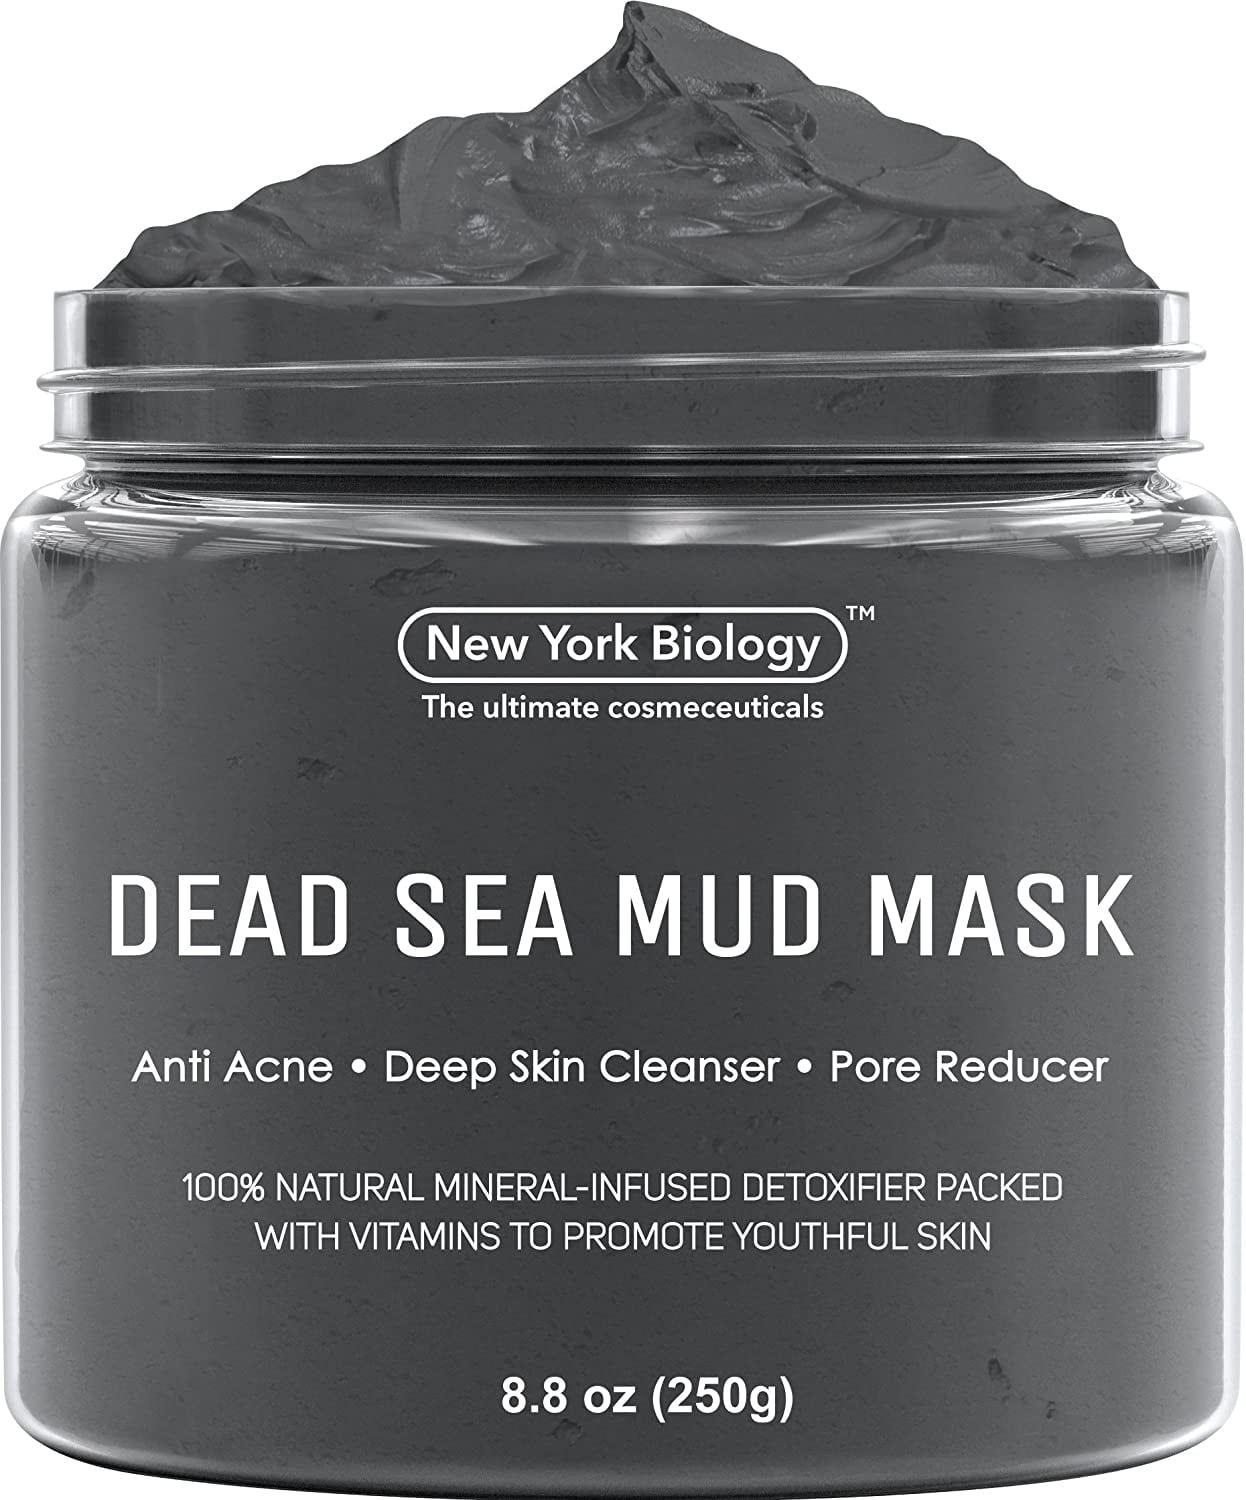 New York Biology Dead Sea Mud Mask for Face and Body, Natural Spa Quality Pore Reducer for Acne, Blackheads and Oily Skin, 8.8 oz photo